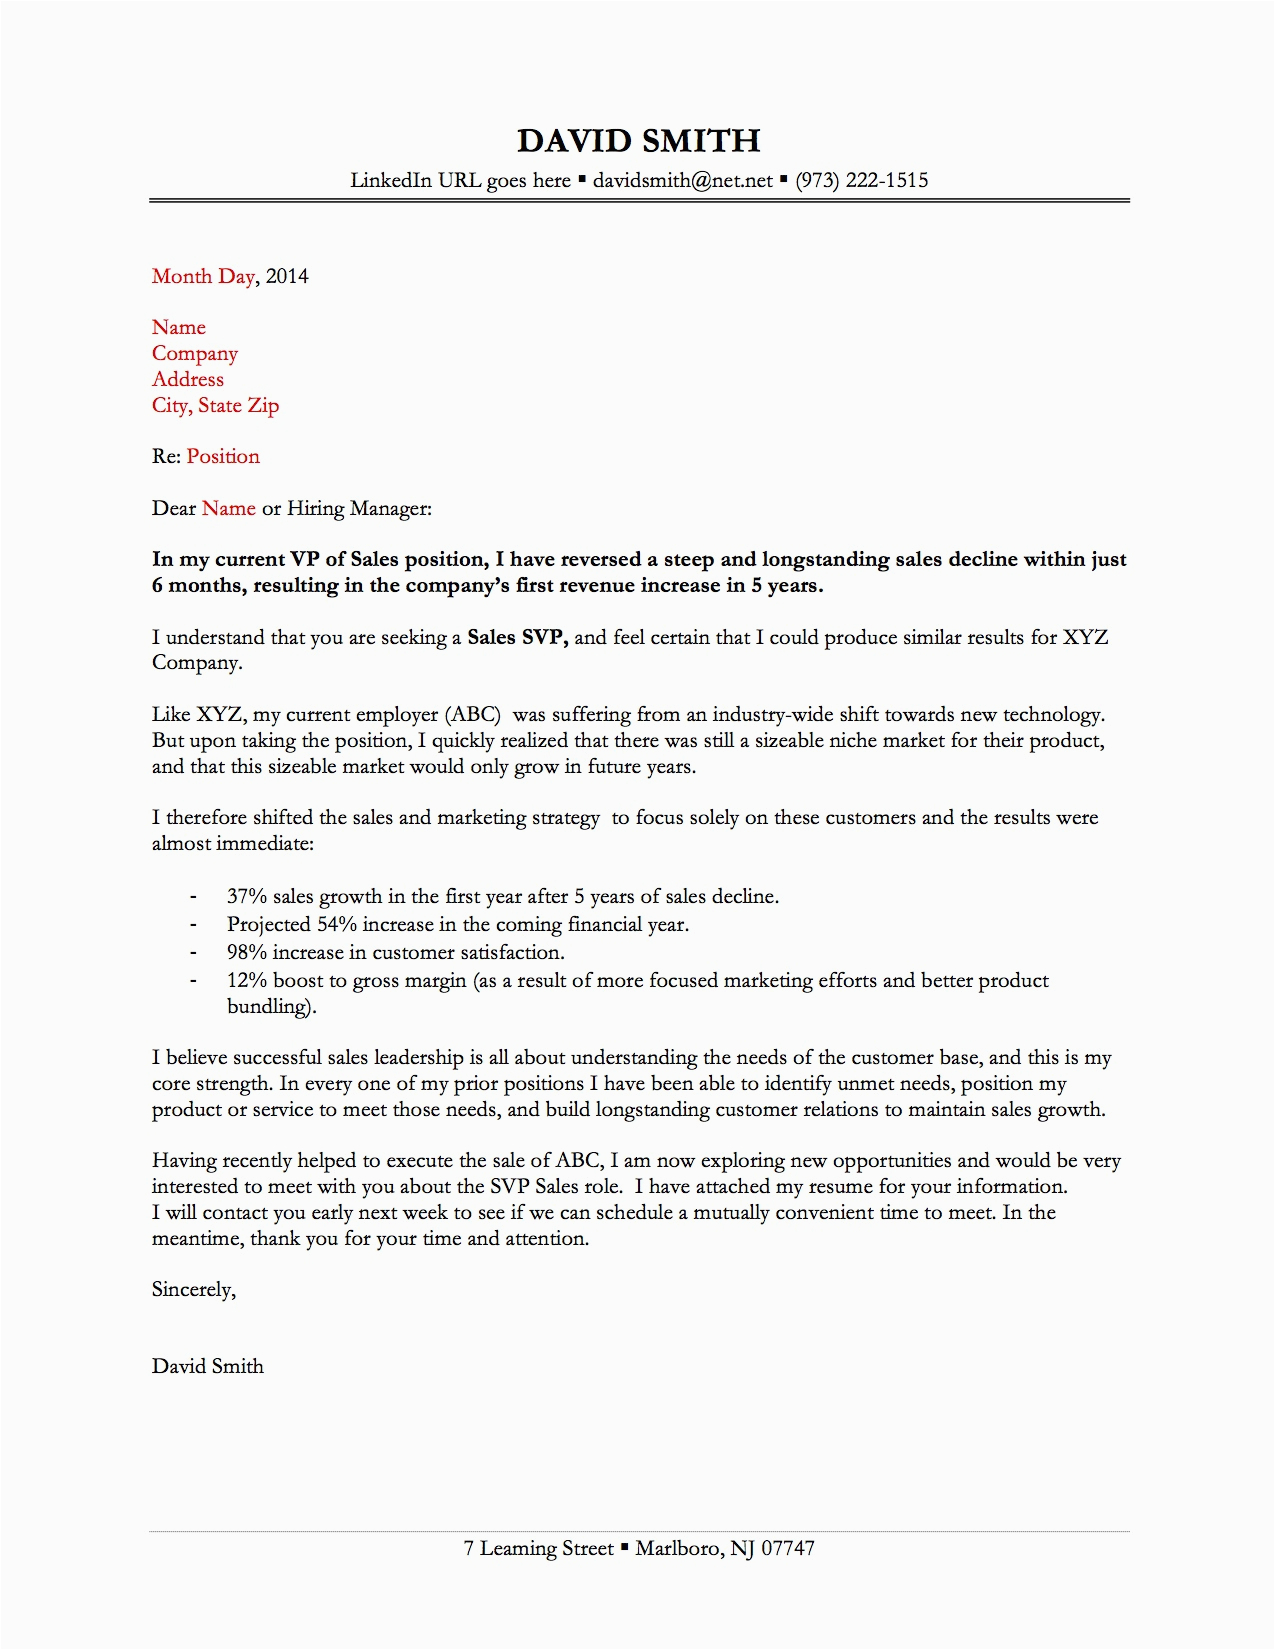 Sample Impressive Resume with A Cover Letter Two Great Cover Letter Examples Blog